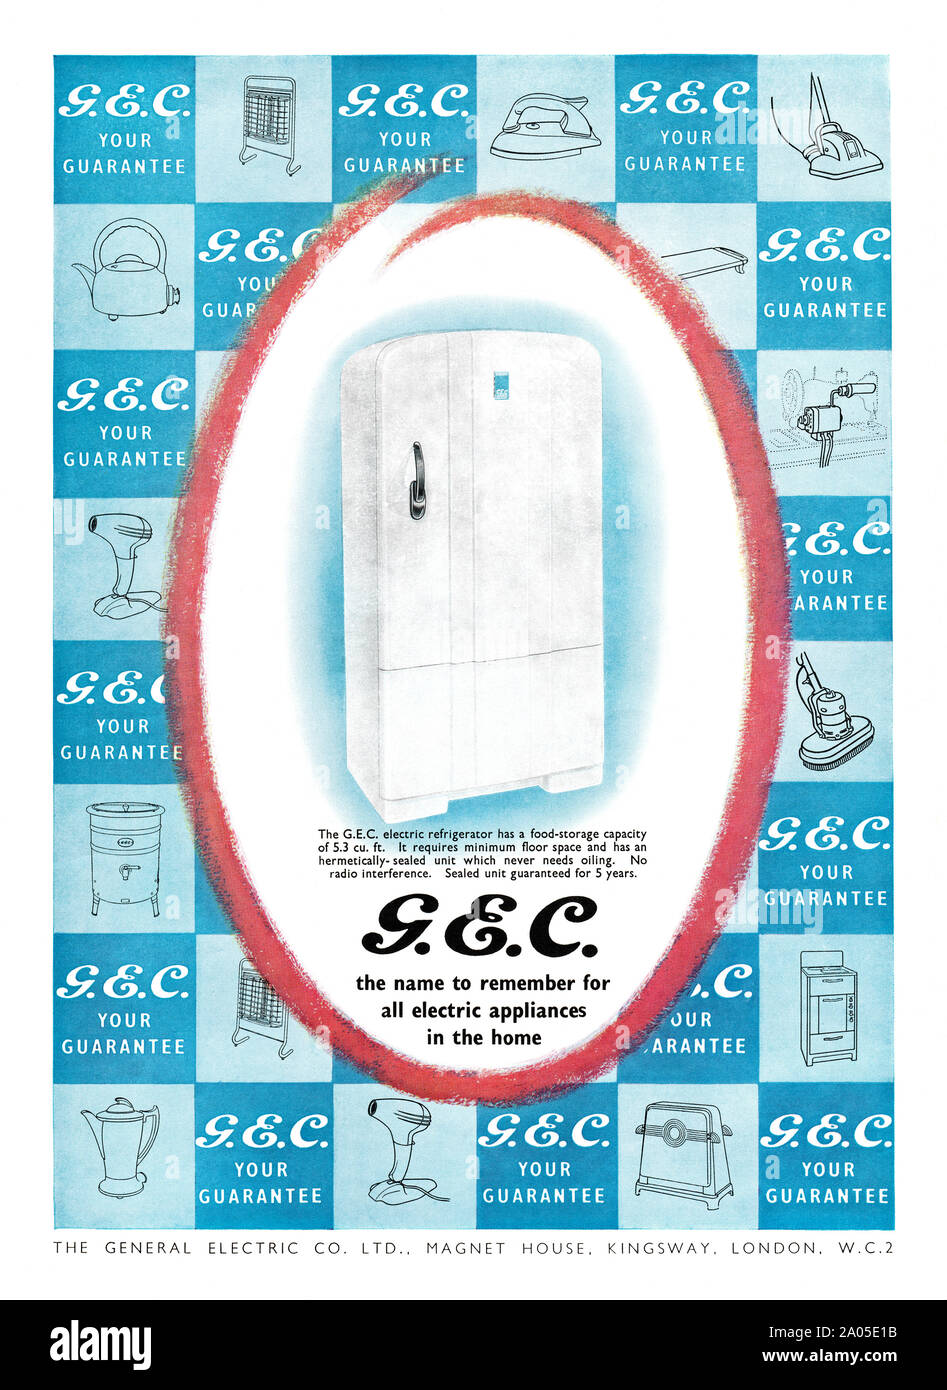 Advert for GEC electrical appliances for the home, 1951. The main illustration shows a refrigerator. Stock Photo